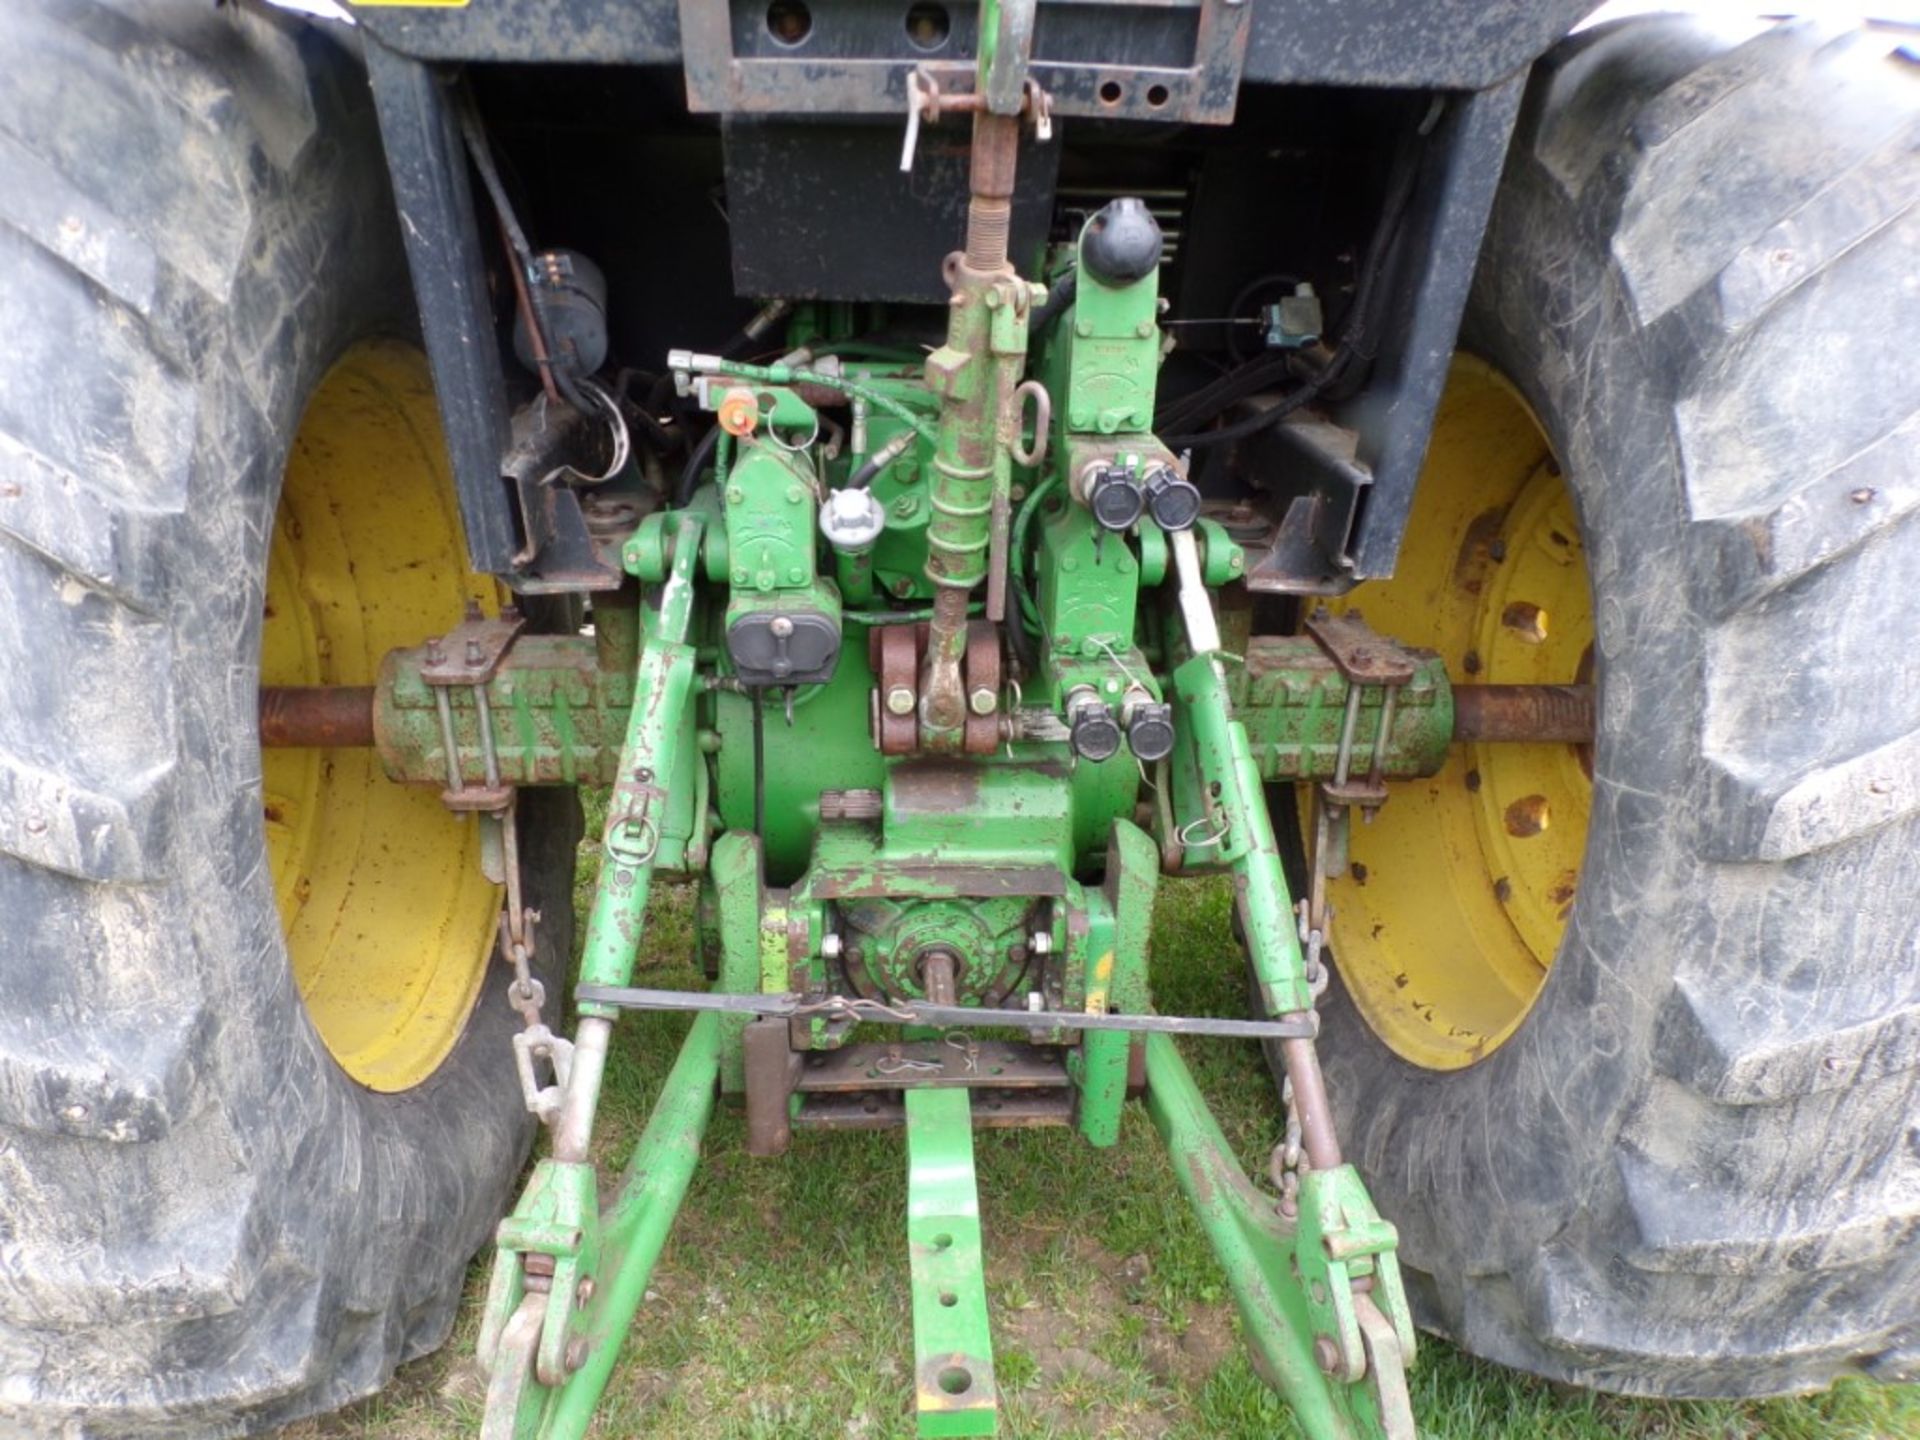 John Deere 4455 4WD Tractor with Power Shift Trans., (3) Rear Hydraulc Remotes, 650-58-38 Rear - Image 5 of 7